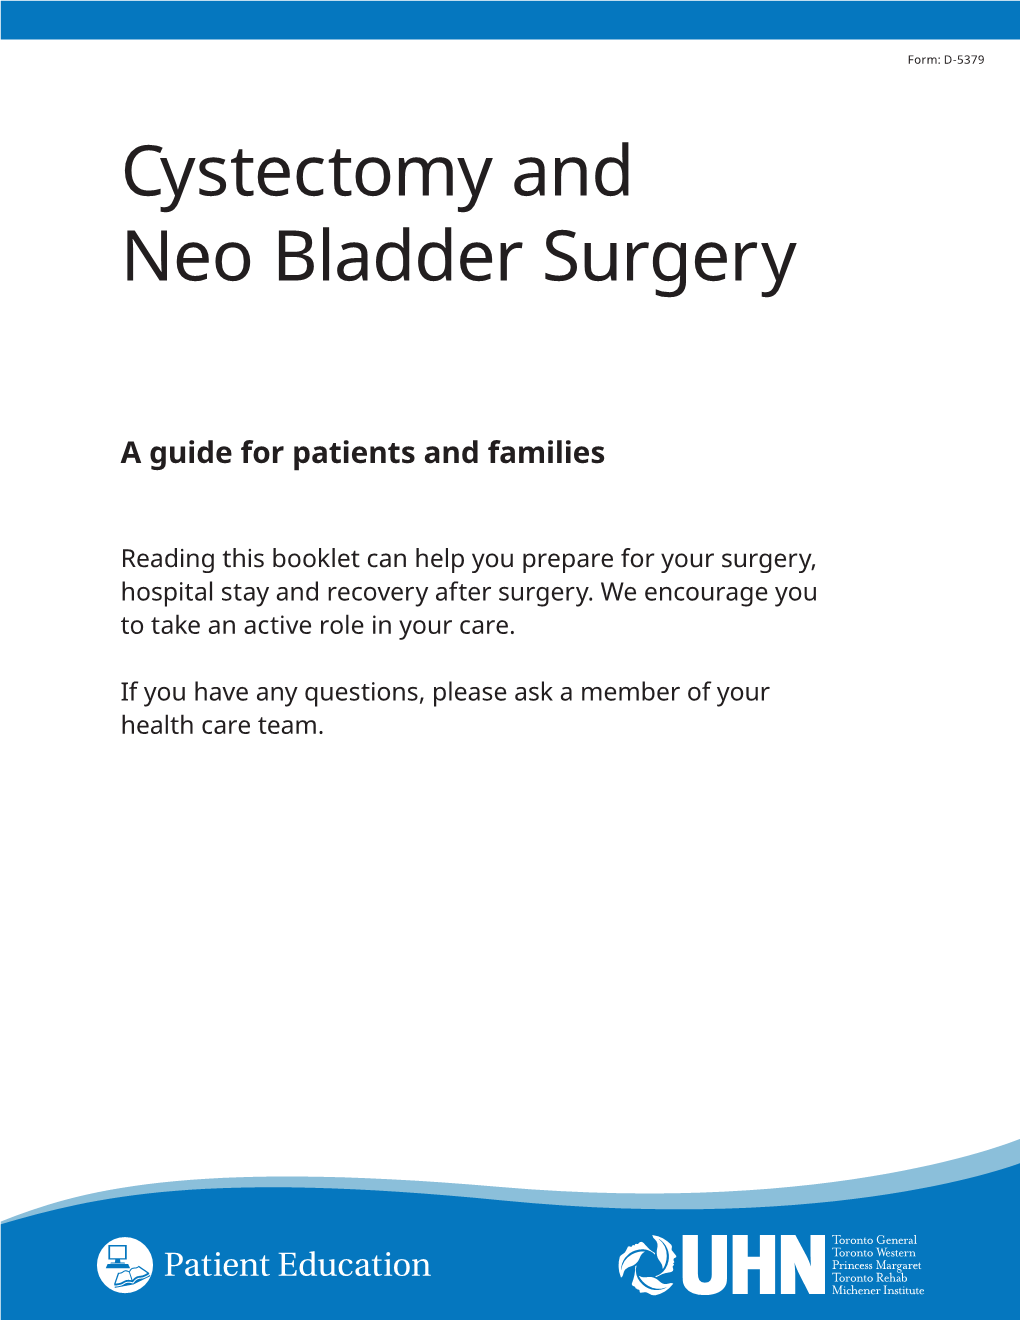 Cystectomy and Neo Bladder Surgery